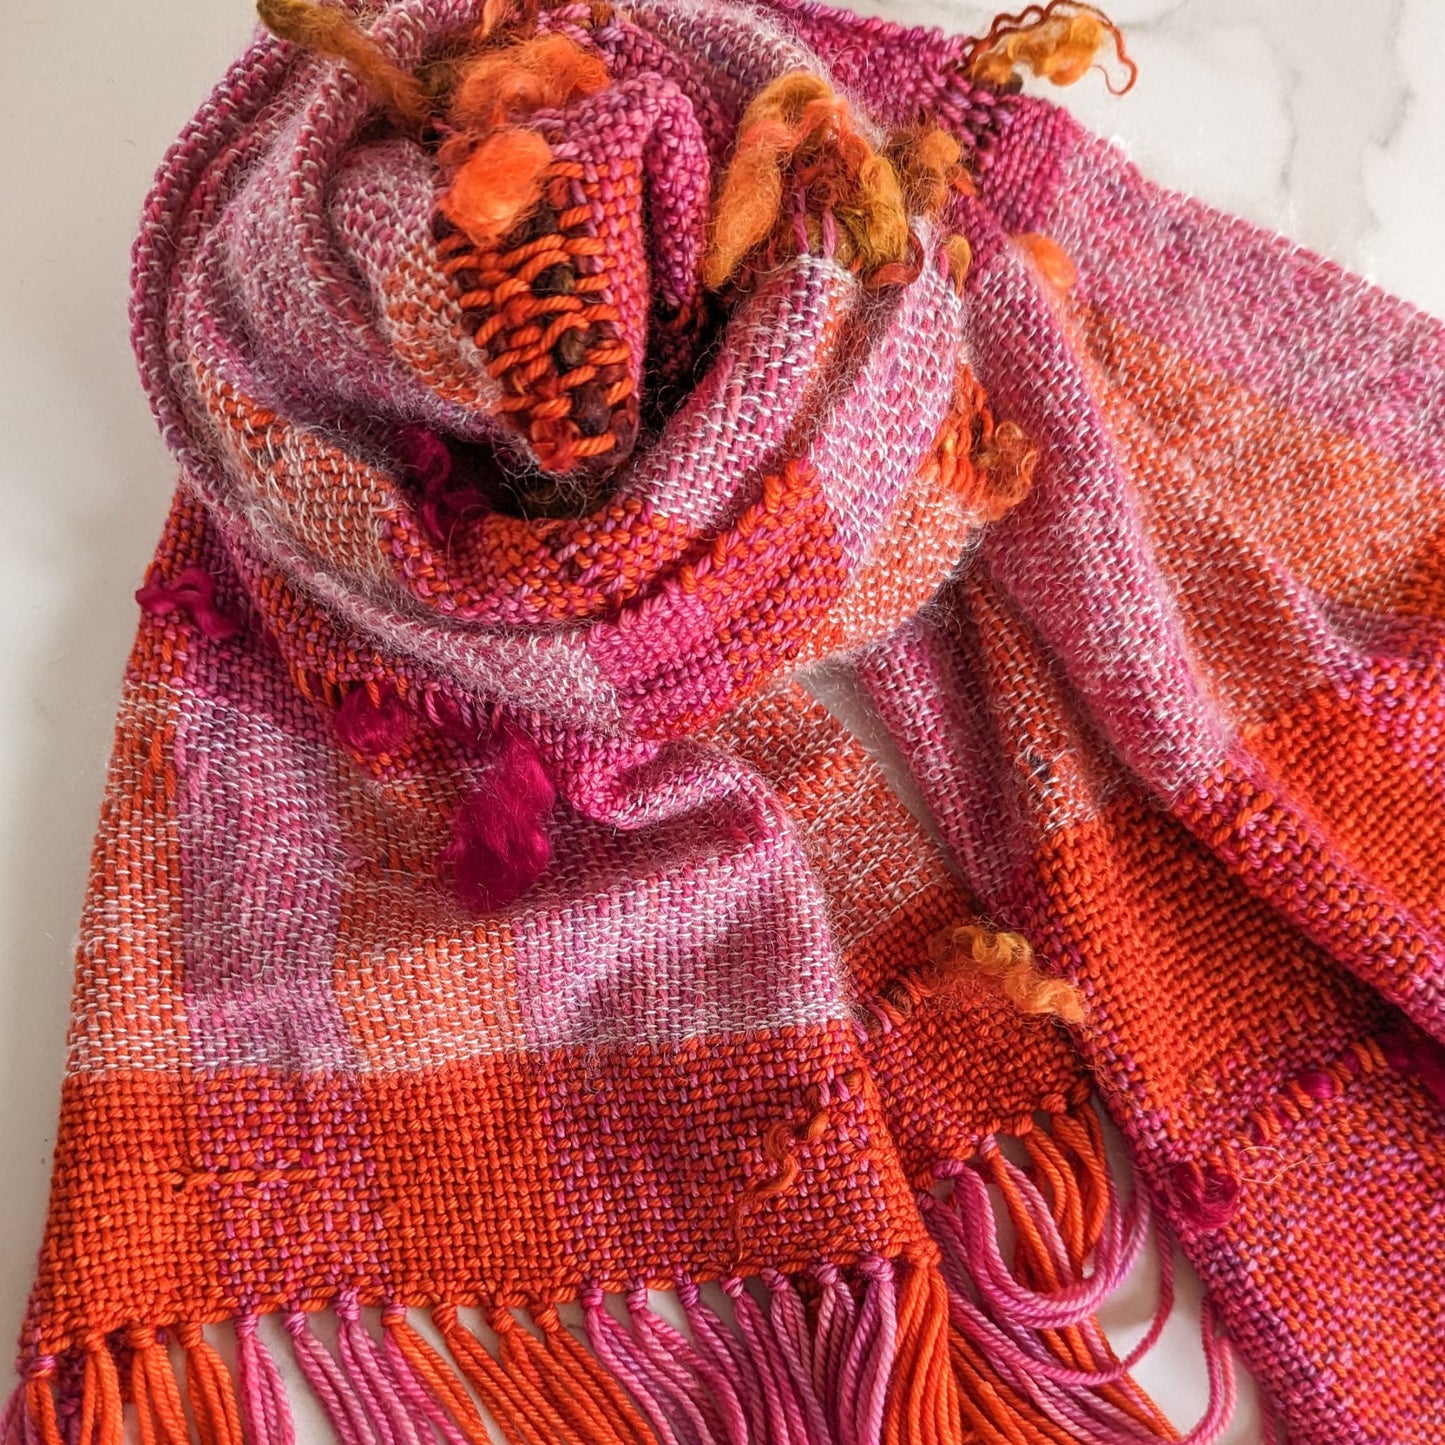 On Wednesday's We Wear Pink! - ART Scarf